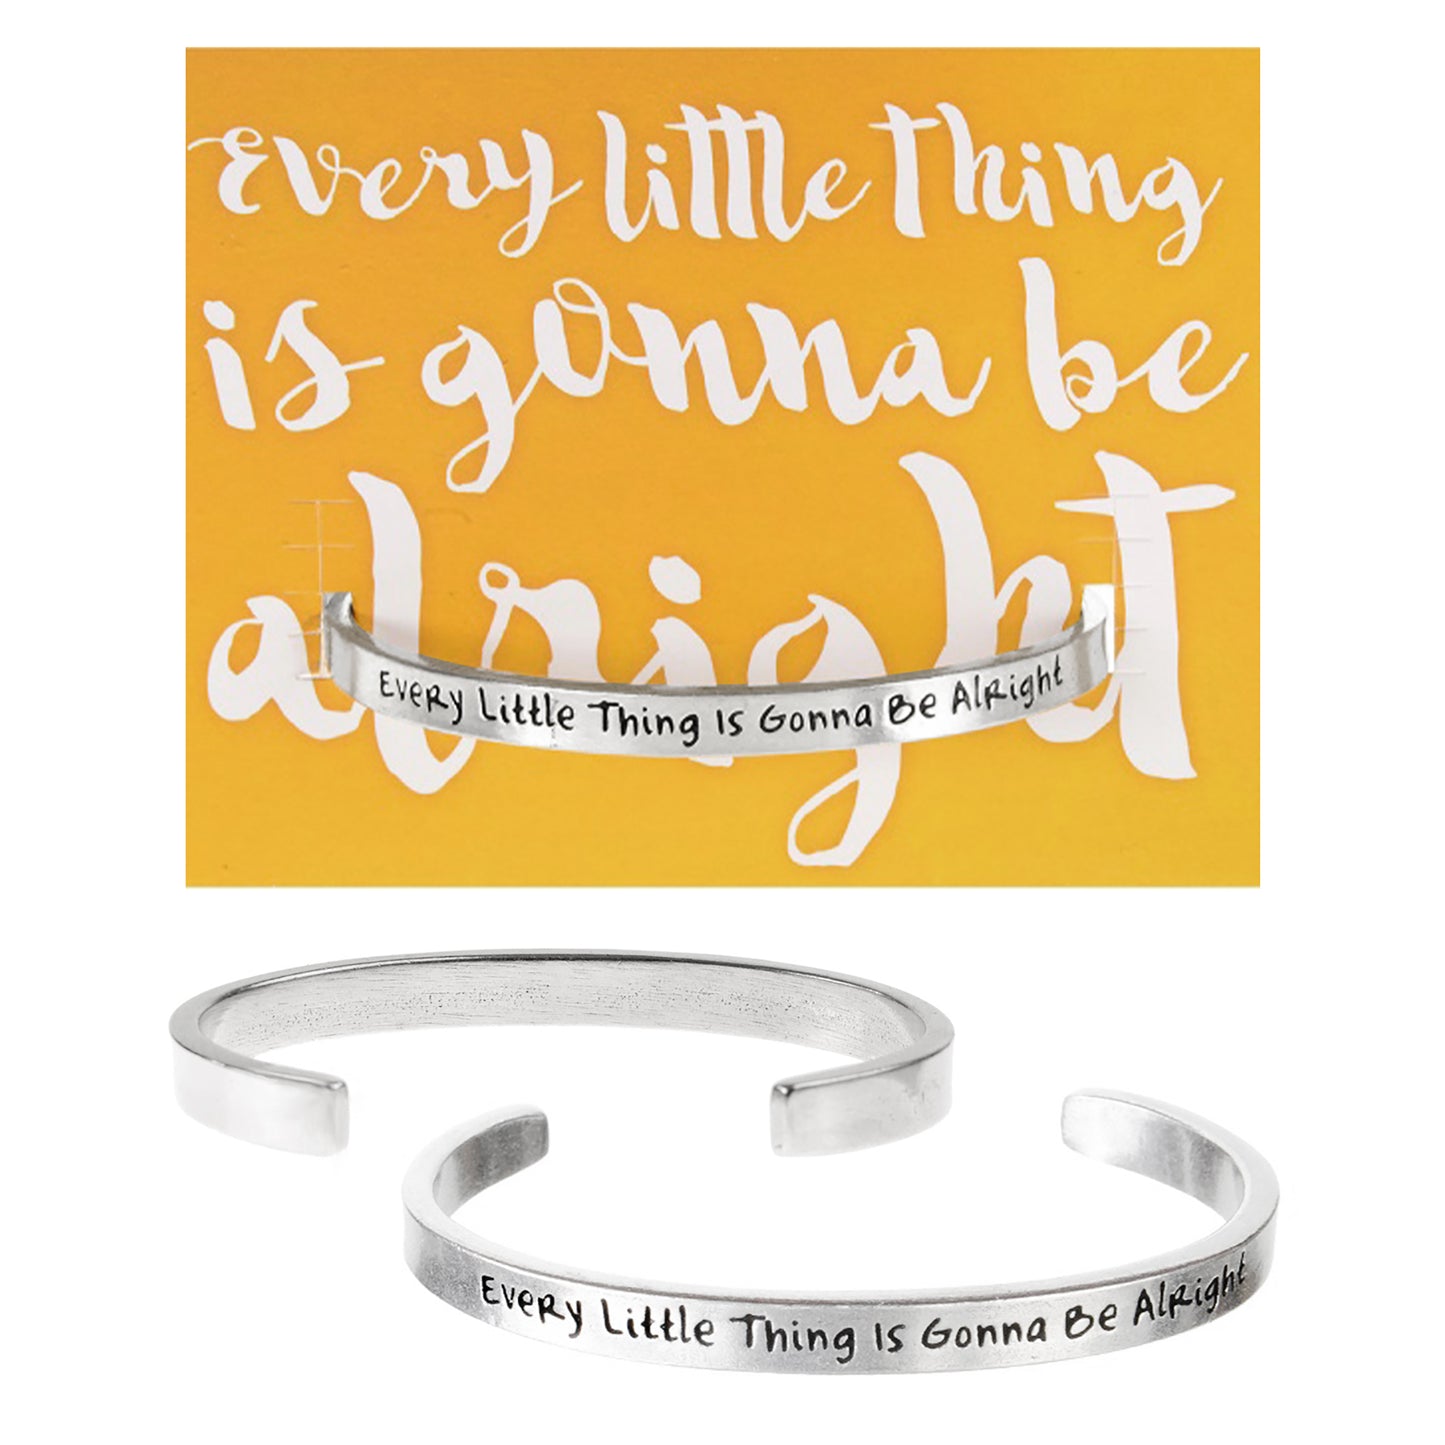 Every little thing is gonna be alright Quotable Cuff Bracelet on Every Little Thing Backer Card